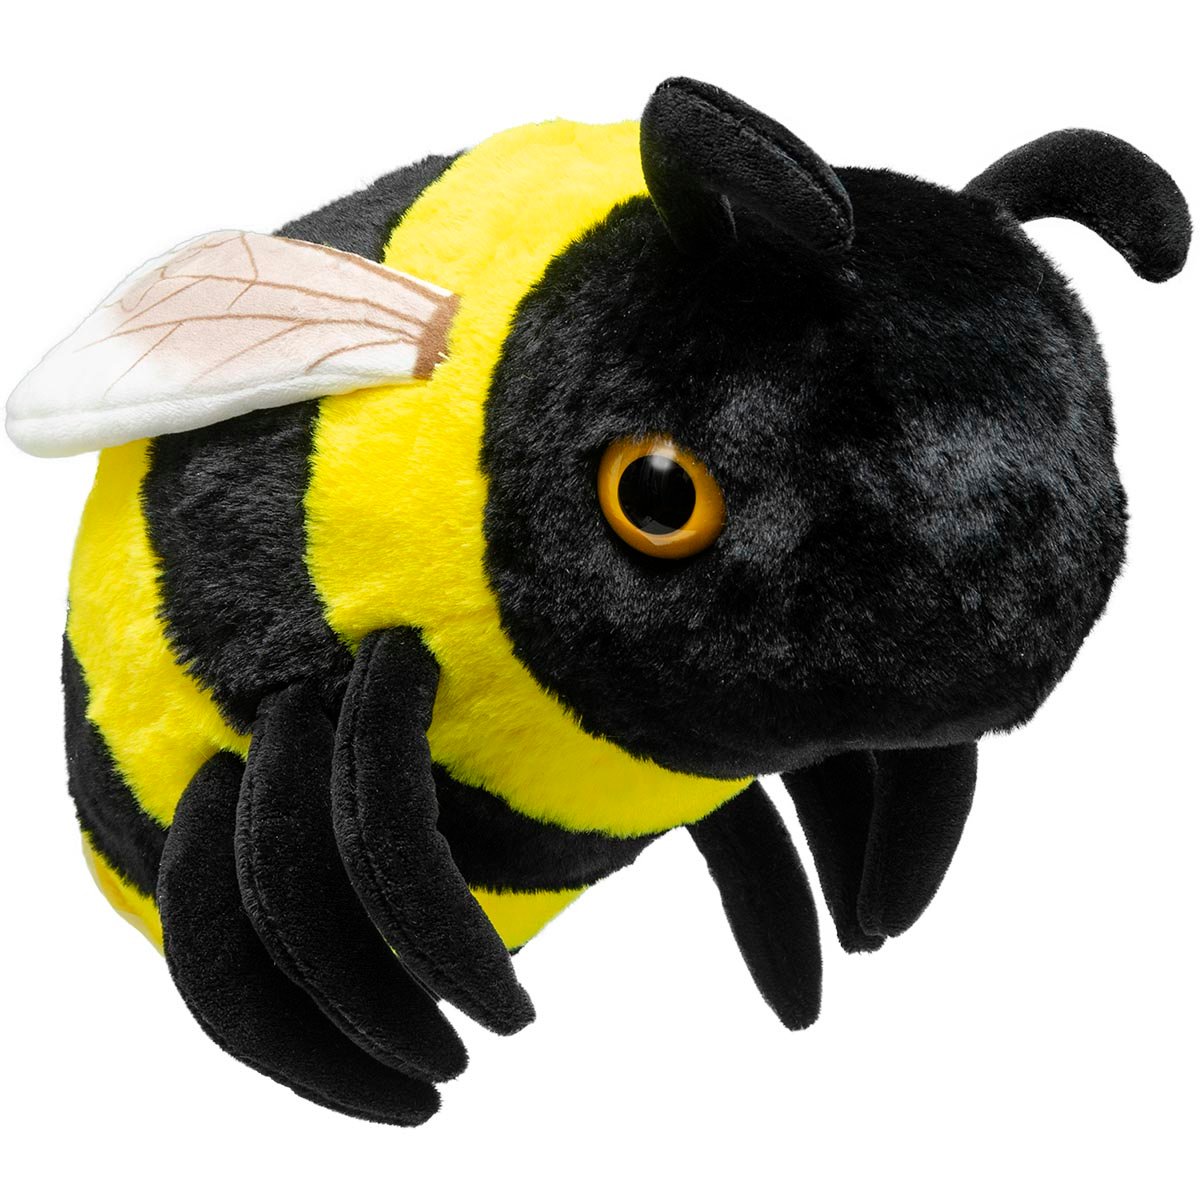 Adopt a Bumblebee  Symbolic Adoptions from WWF